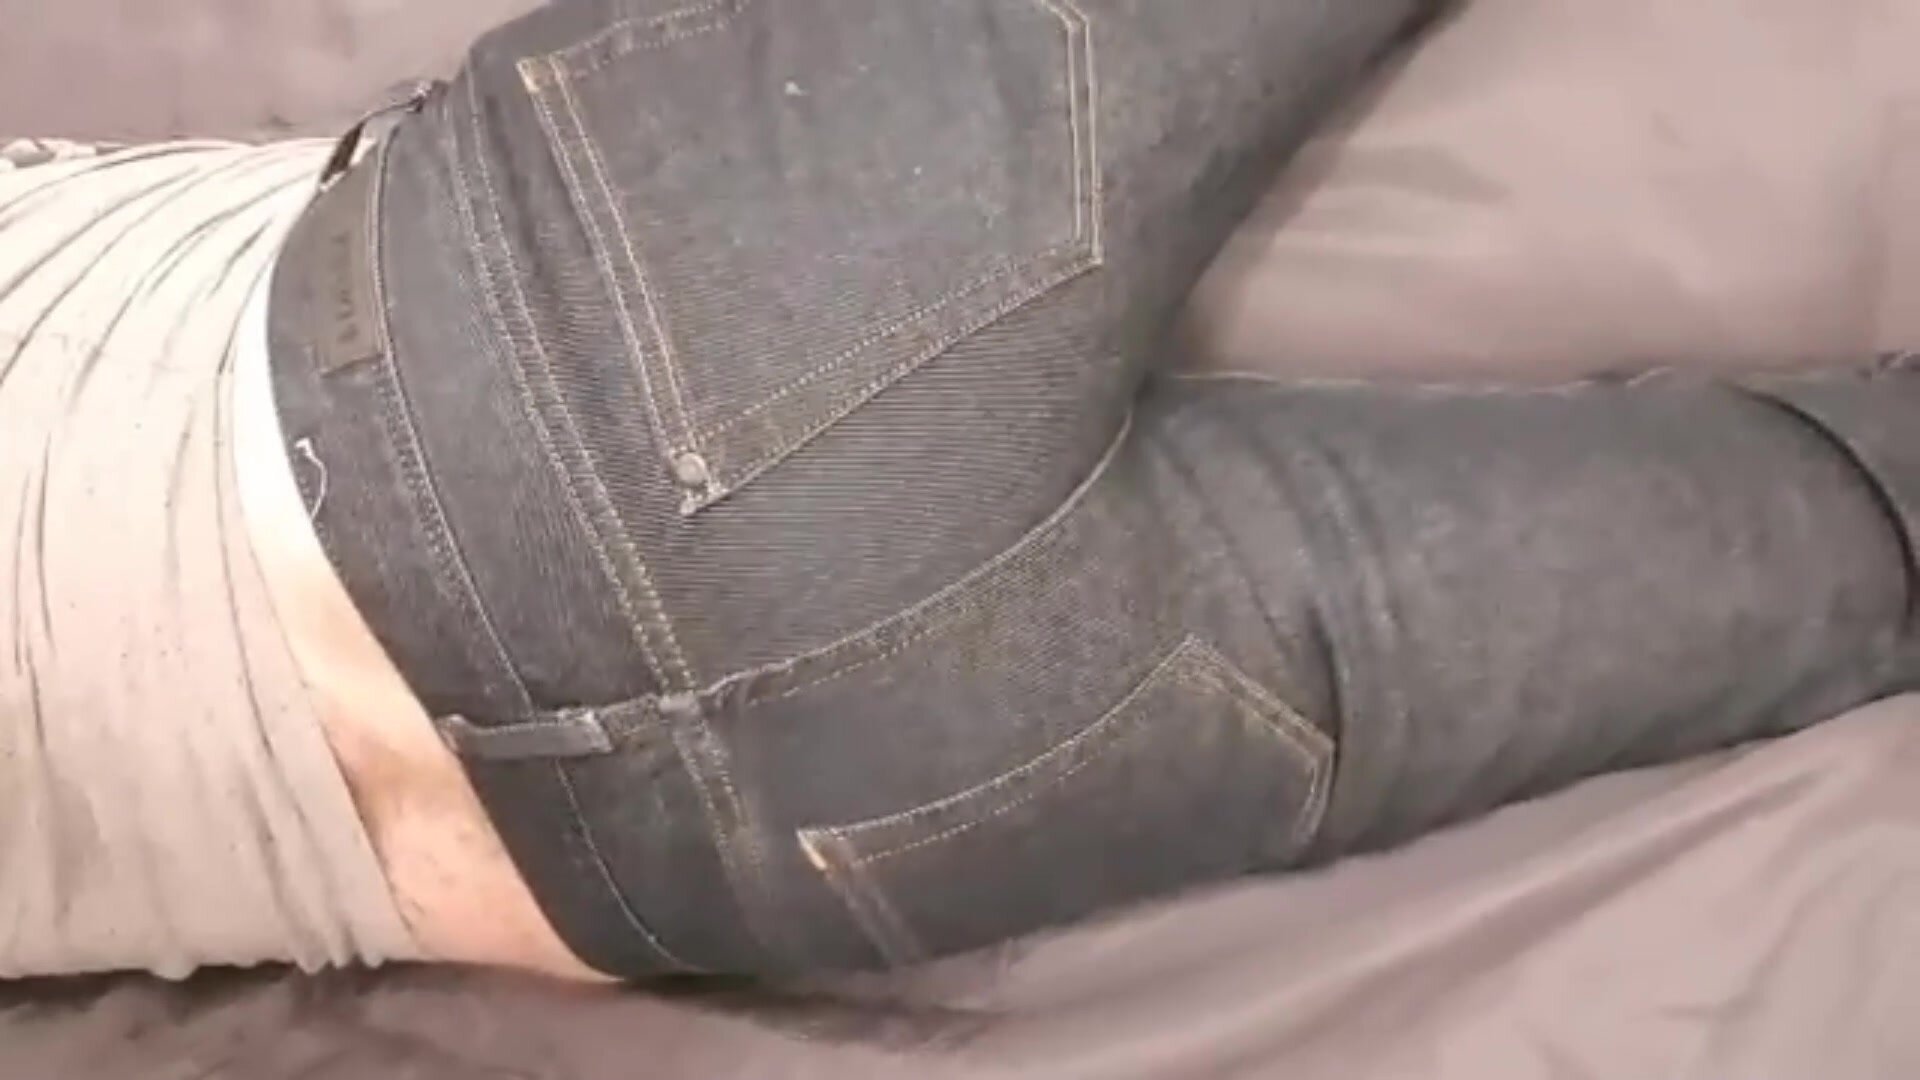 Farting in jeans - video 14